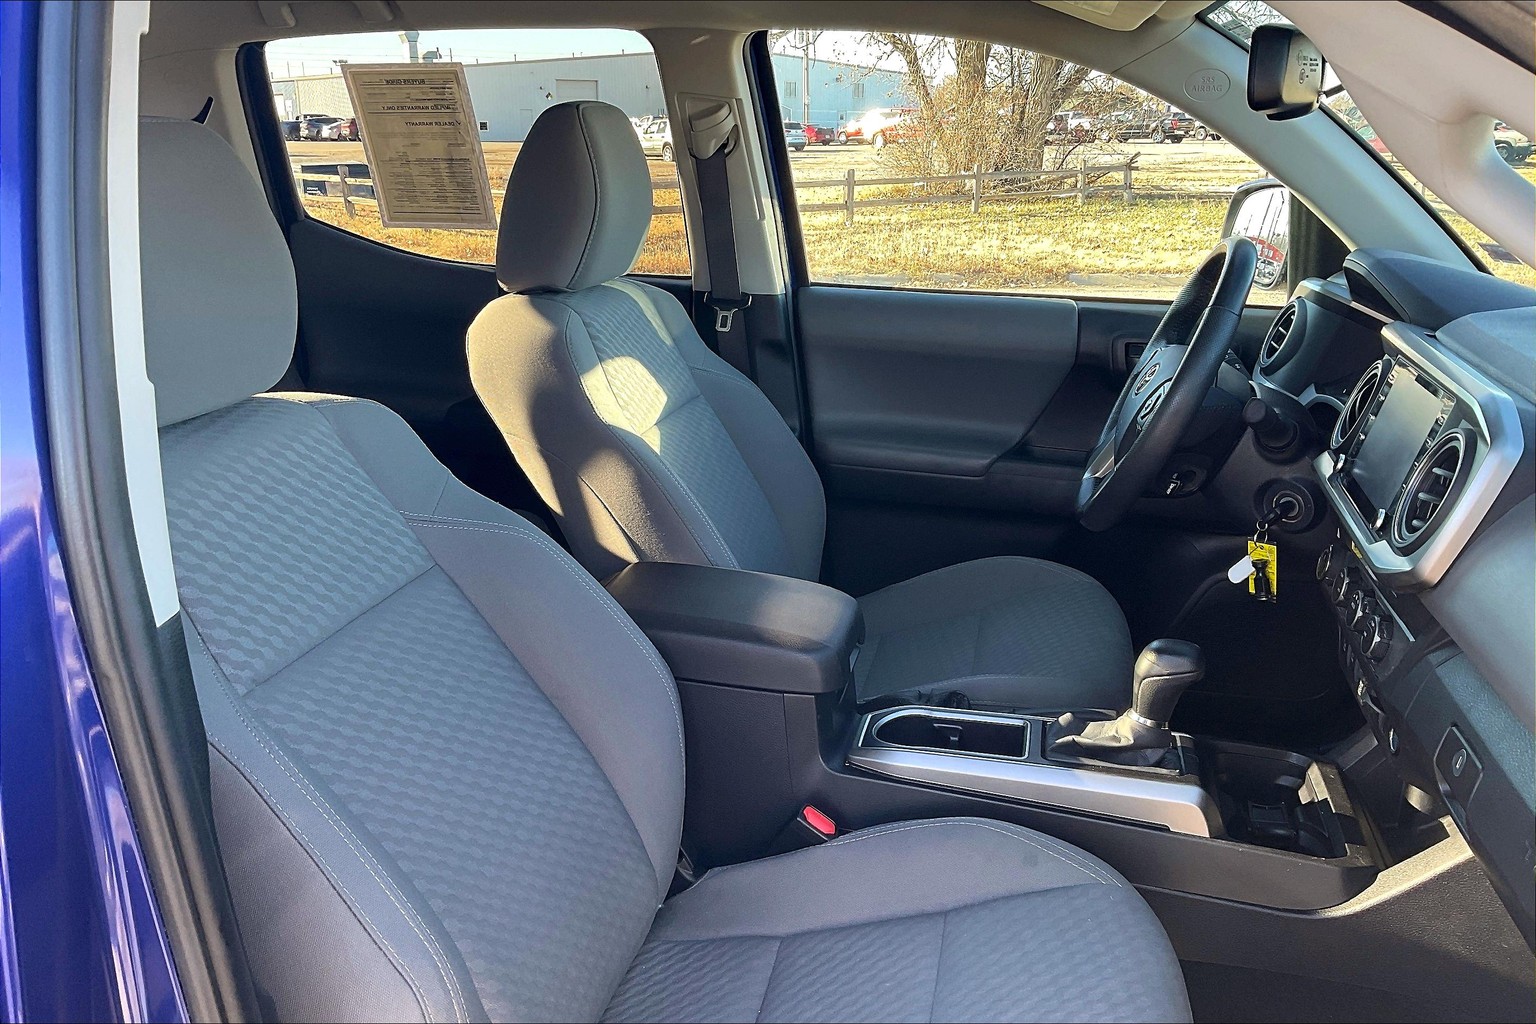 What is the best product to clean the interior of a Tacoma, the dash, door  panels and around the Instrument panels? I have seat covers that match the  seats in my 22